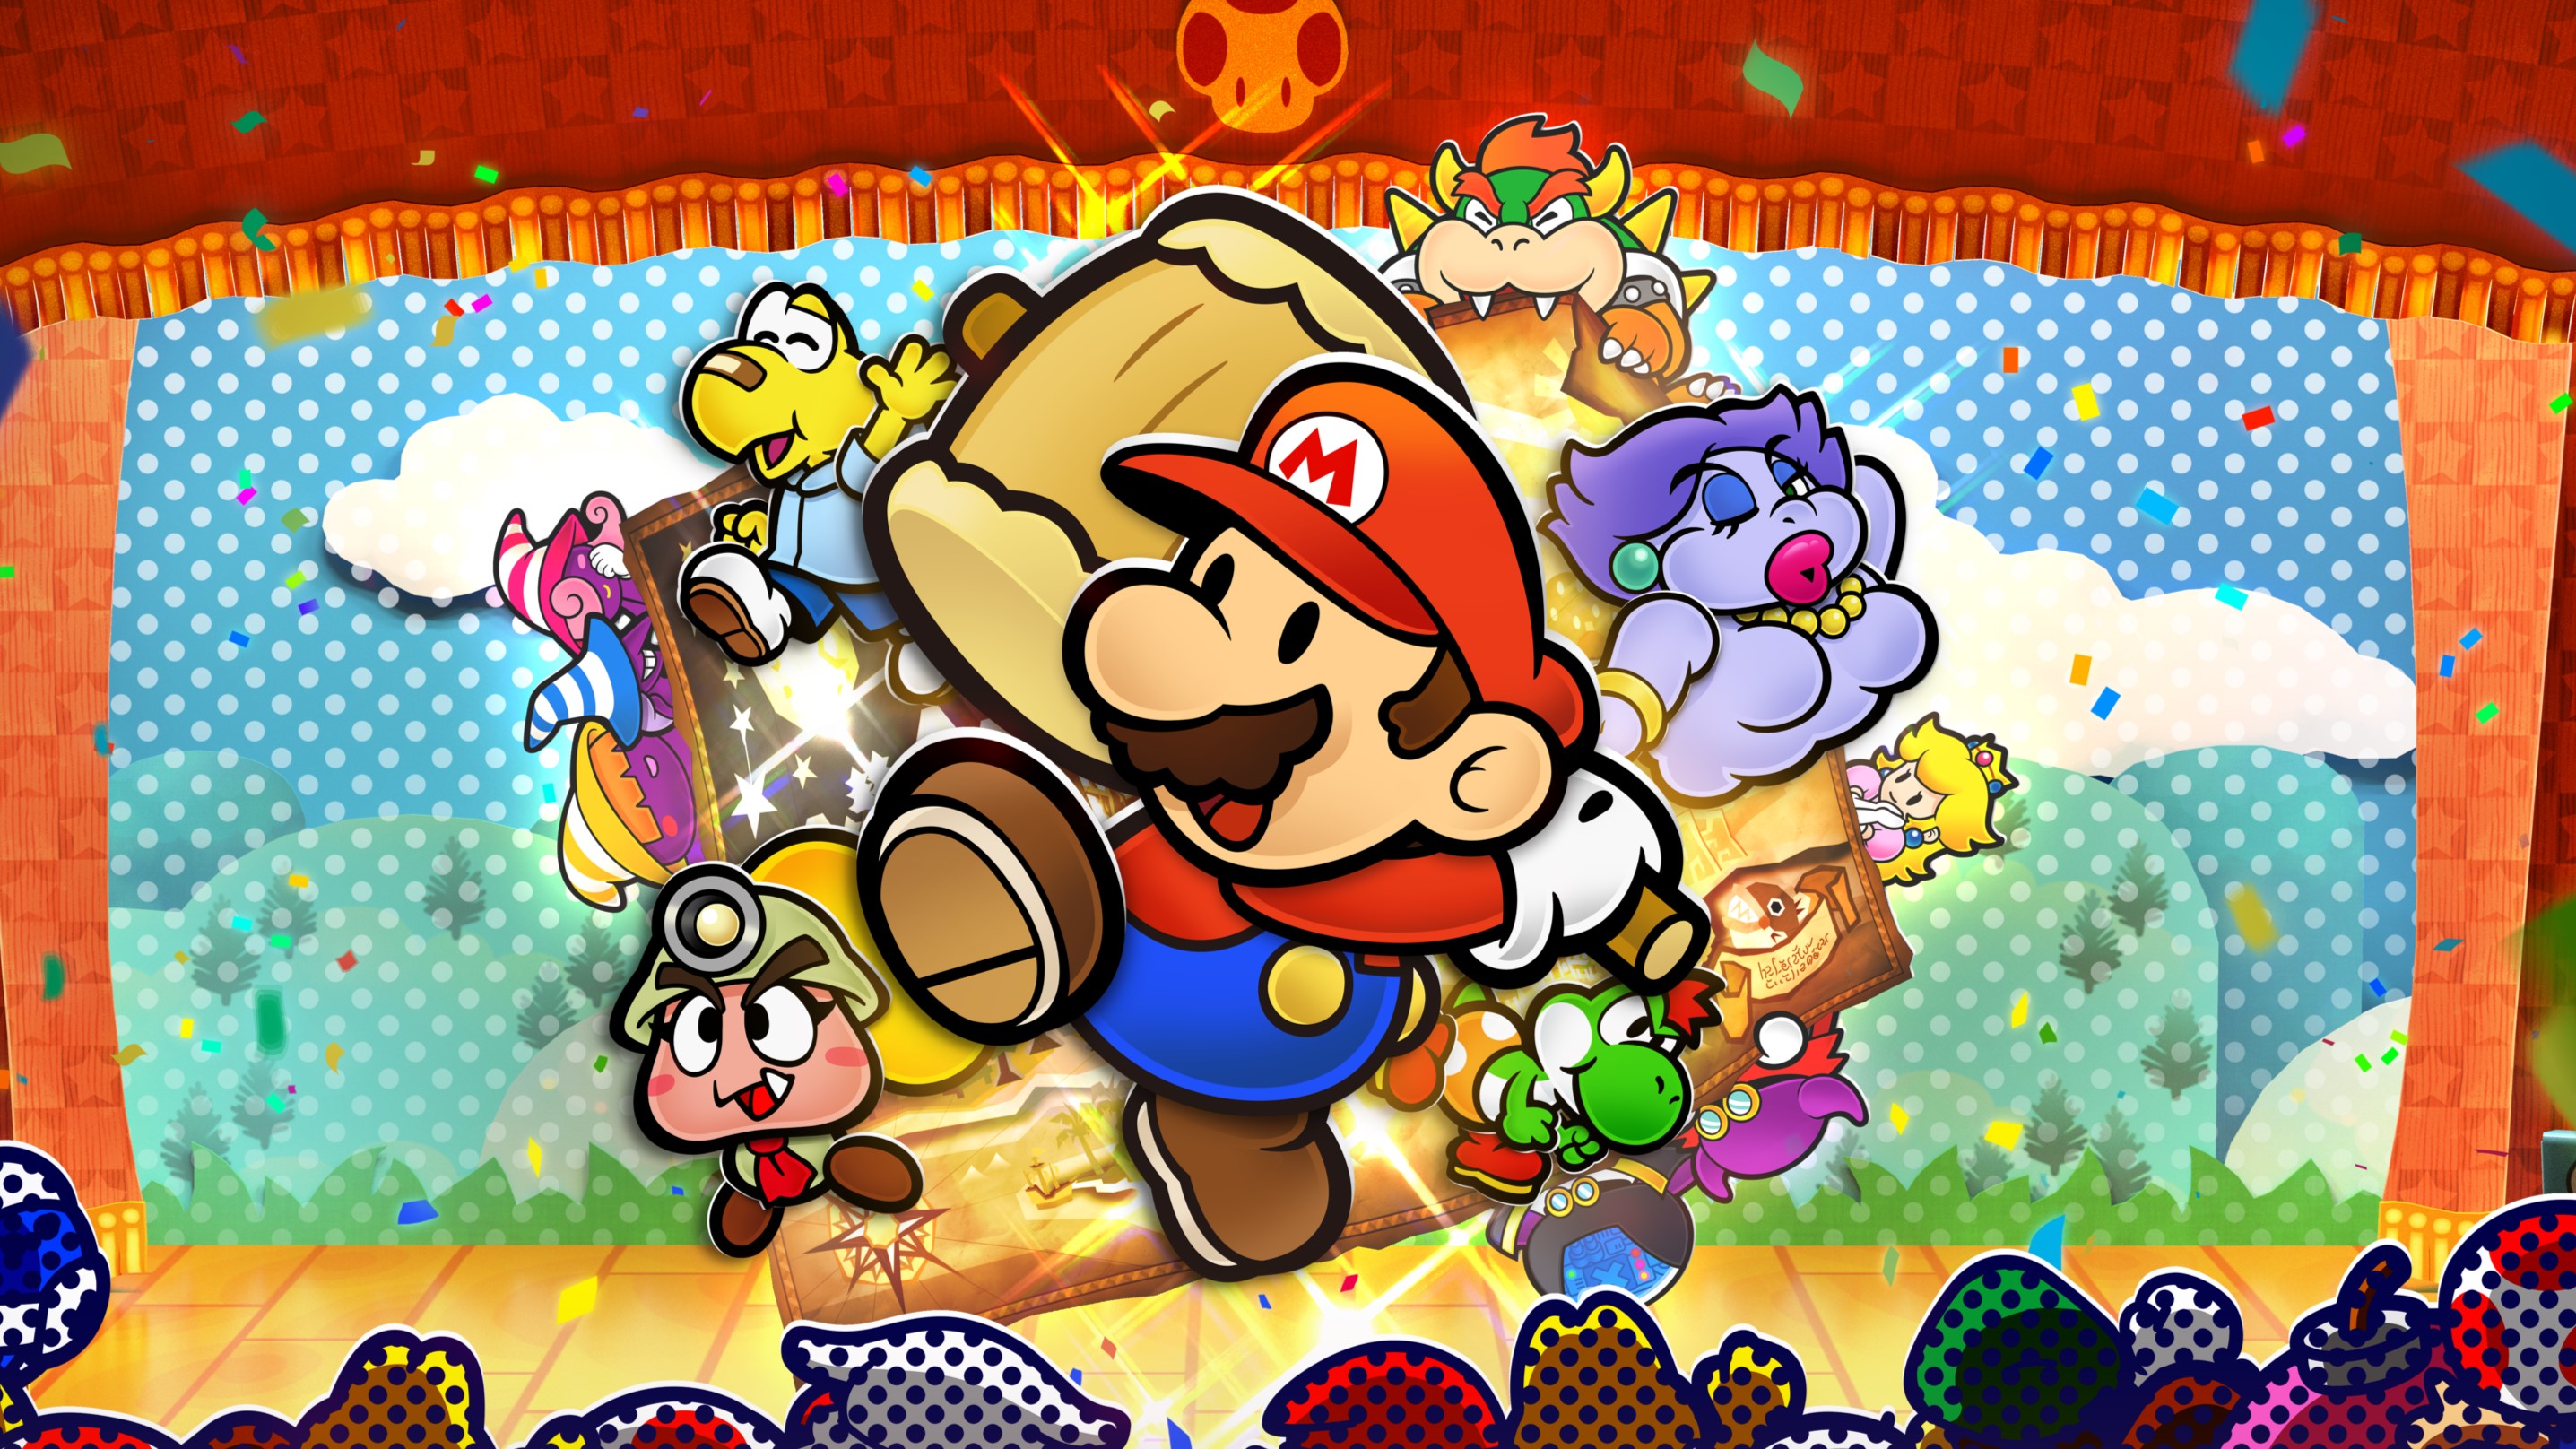 Cropped key art for Paper Mario: The Thousand-Year Door.